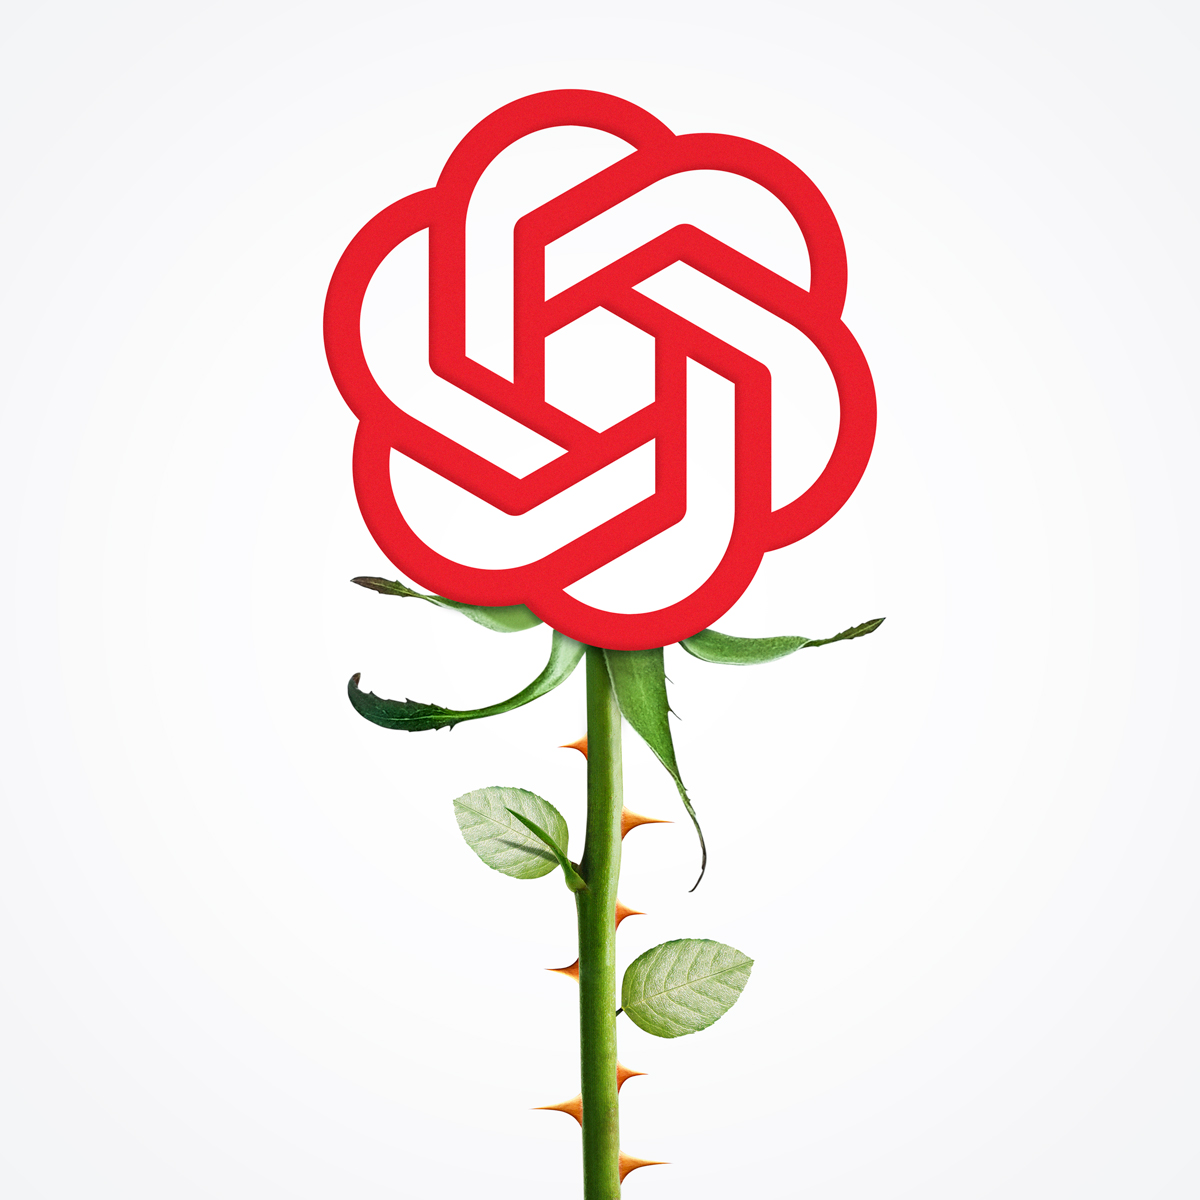 An illustration by Mariaelena Caputi of a red rose whose corolla consists of the OpenAI company logo and whose stem is full of sharp thorns. It is a metaphor for the complexity and contradictions that the progress of artificial intelligence is bringing out.